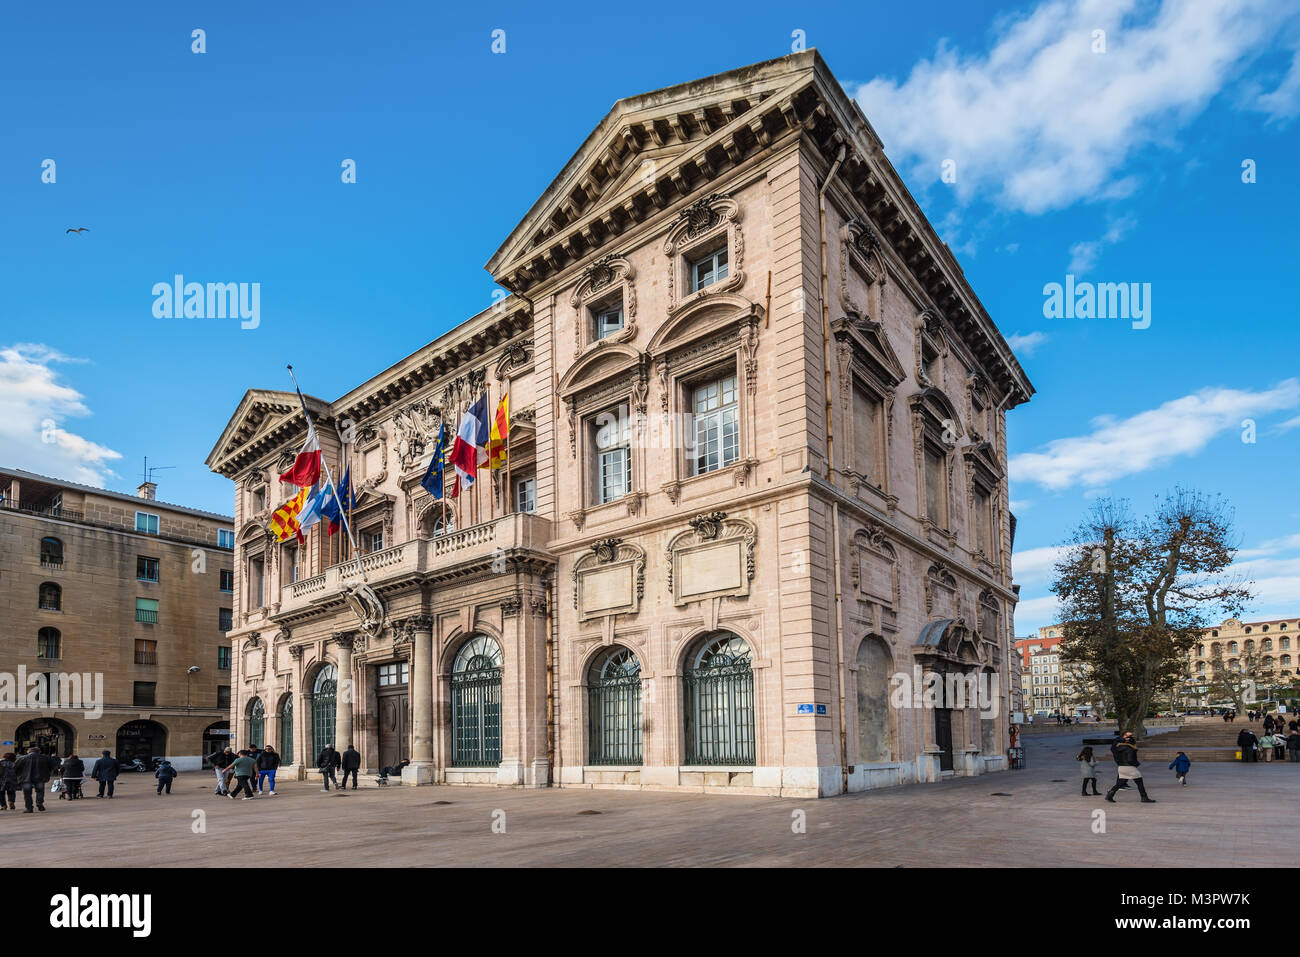 Marseille, France - December 4, 2016: Wide-angle view of the historic town-hall 'Hotel de Ville' in Marseille, Provence, France. Stock Photo